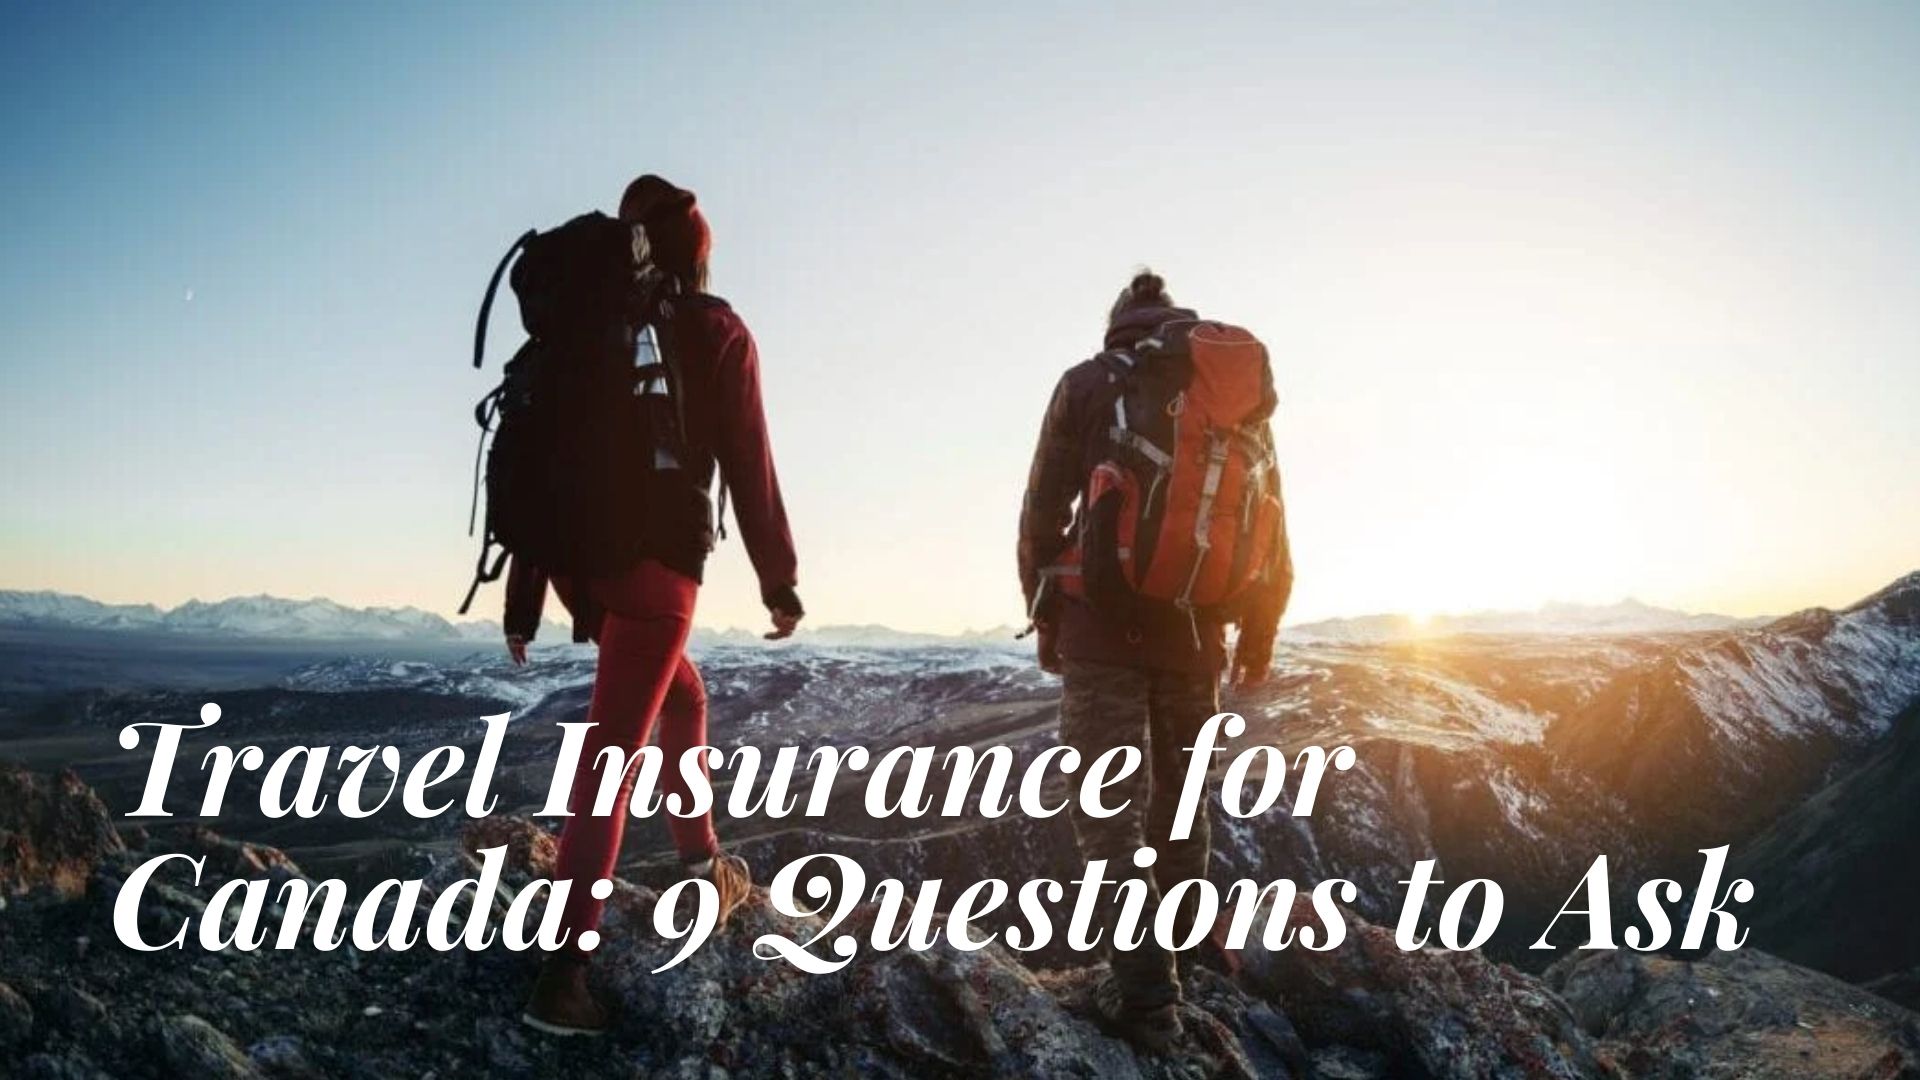 Travel Insurance for Canada: 9 Questions to Ask